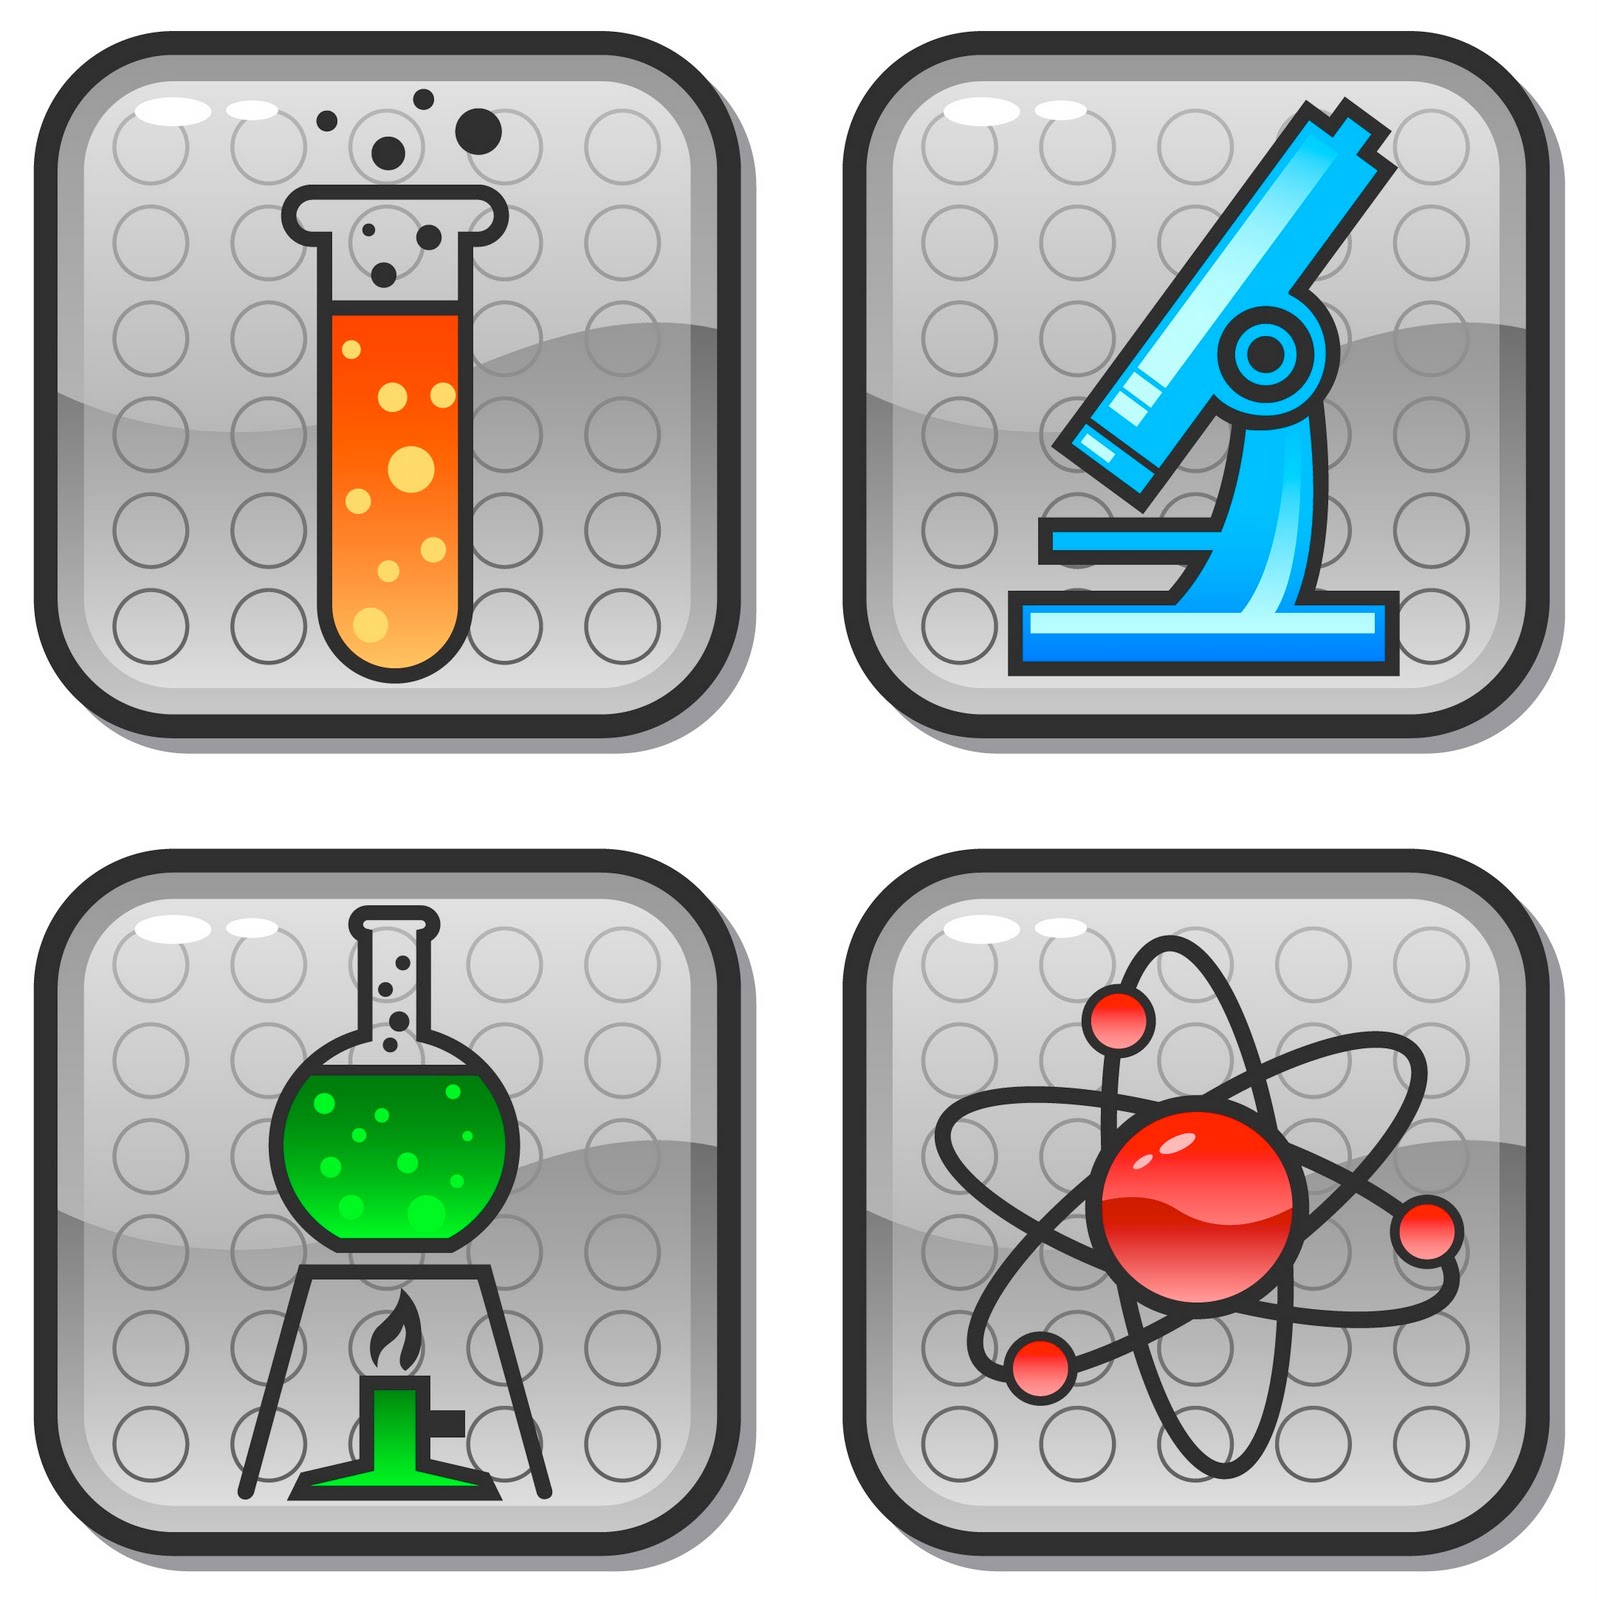 Clip art science clipart hdcl